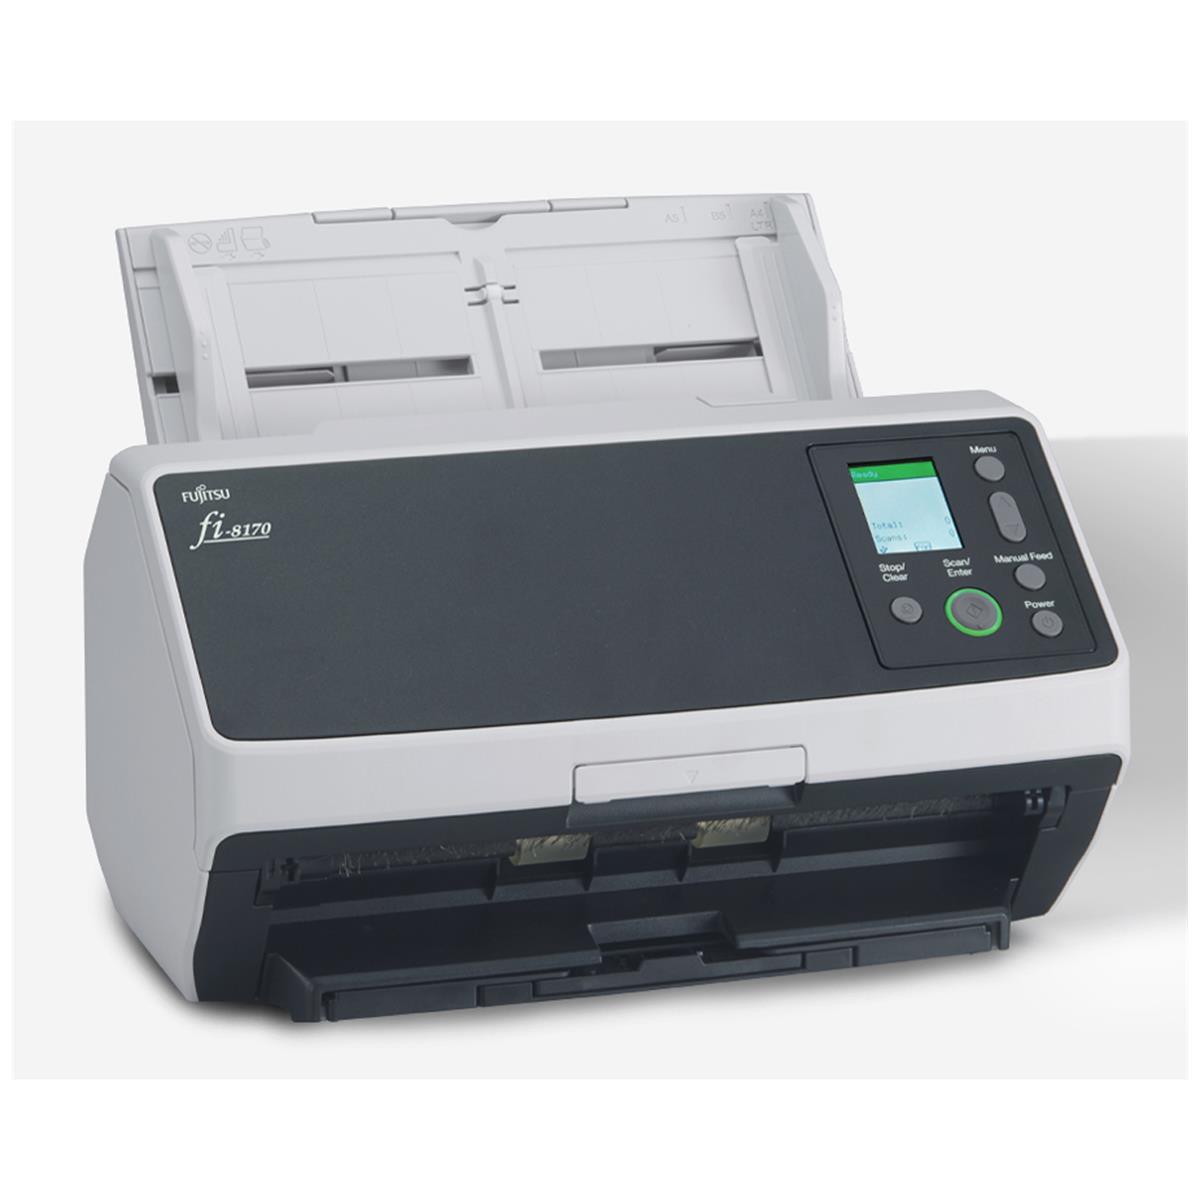 Image of Fujitsu fi-8170 Document Scanner Deluxe Bundle with Paperstream Capture Pro